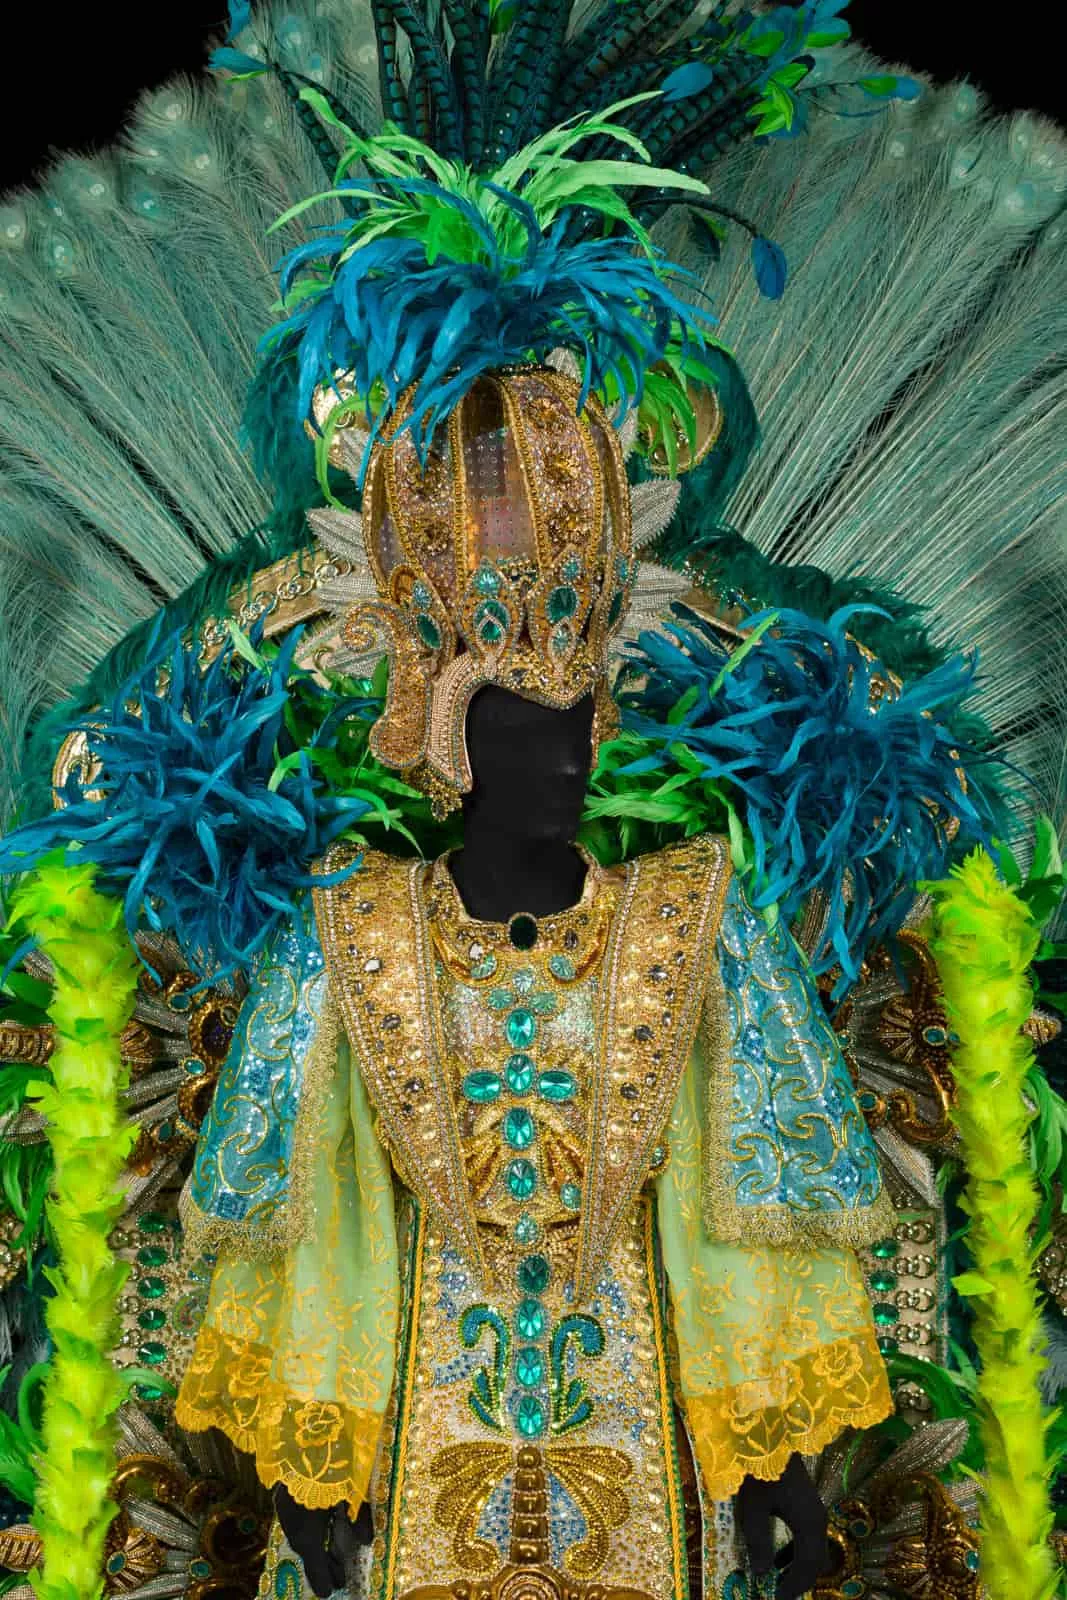 Rio de Janeiro Carnival: All You Need to Know to Plan a Trip